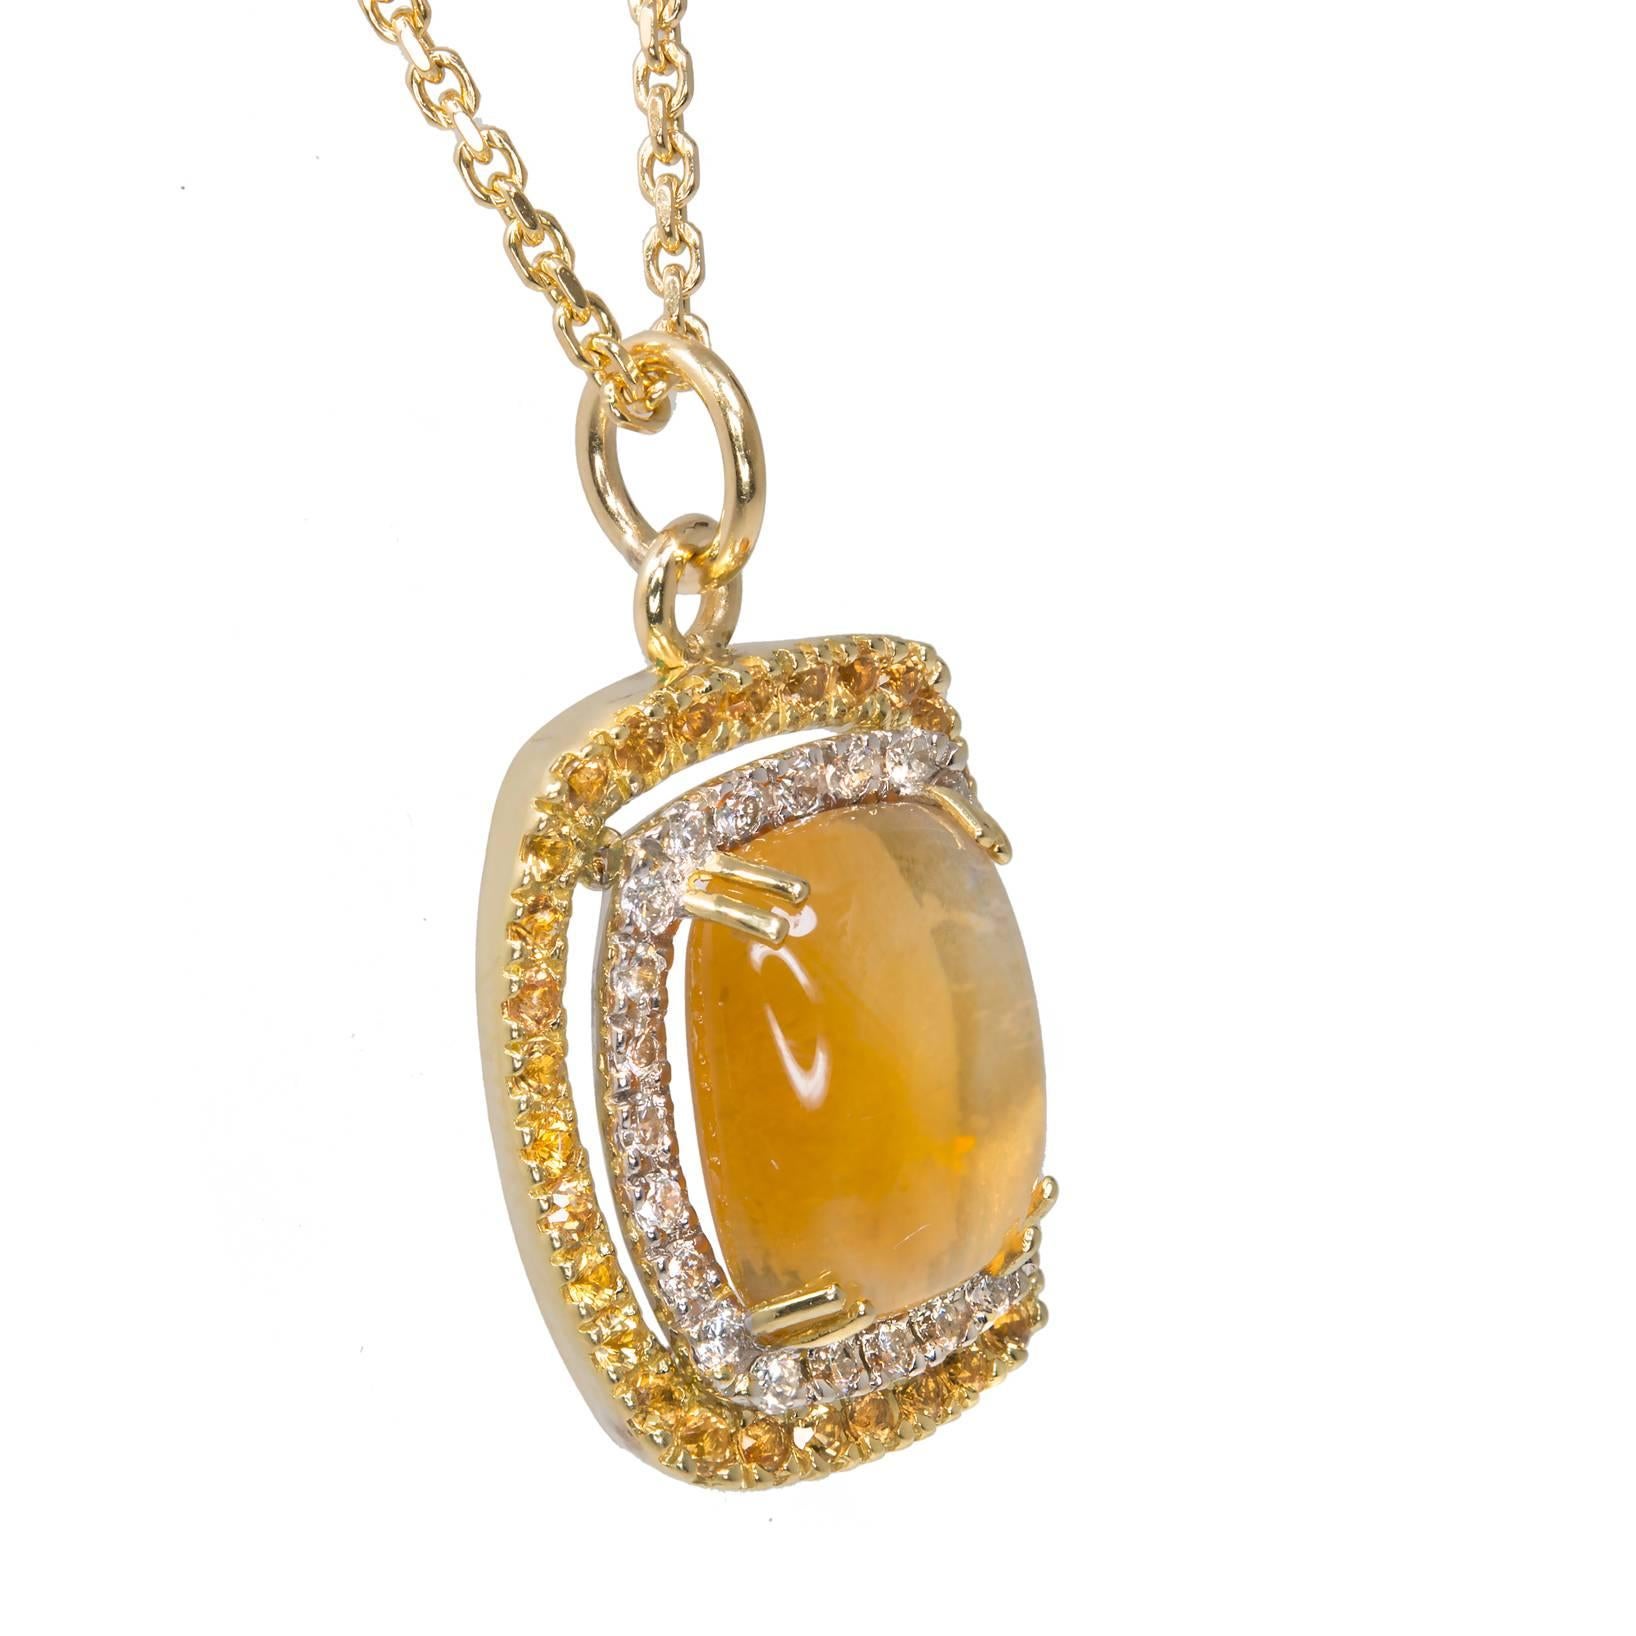 18k yellow gold necklace and chain set with a cabochon Citrine, diamonds and yellow Sapphires around it.

1cushion cabochon yellow Citrine, approx. total weight 5.00cts, 12.58 x 10.20 x 6.40mm
32 round yellow Sapphires, approx. total weight